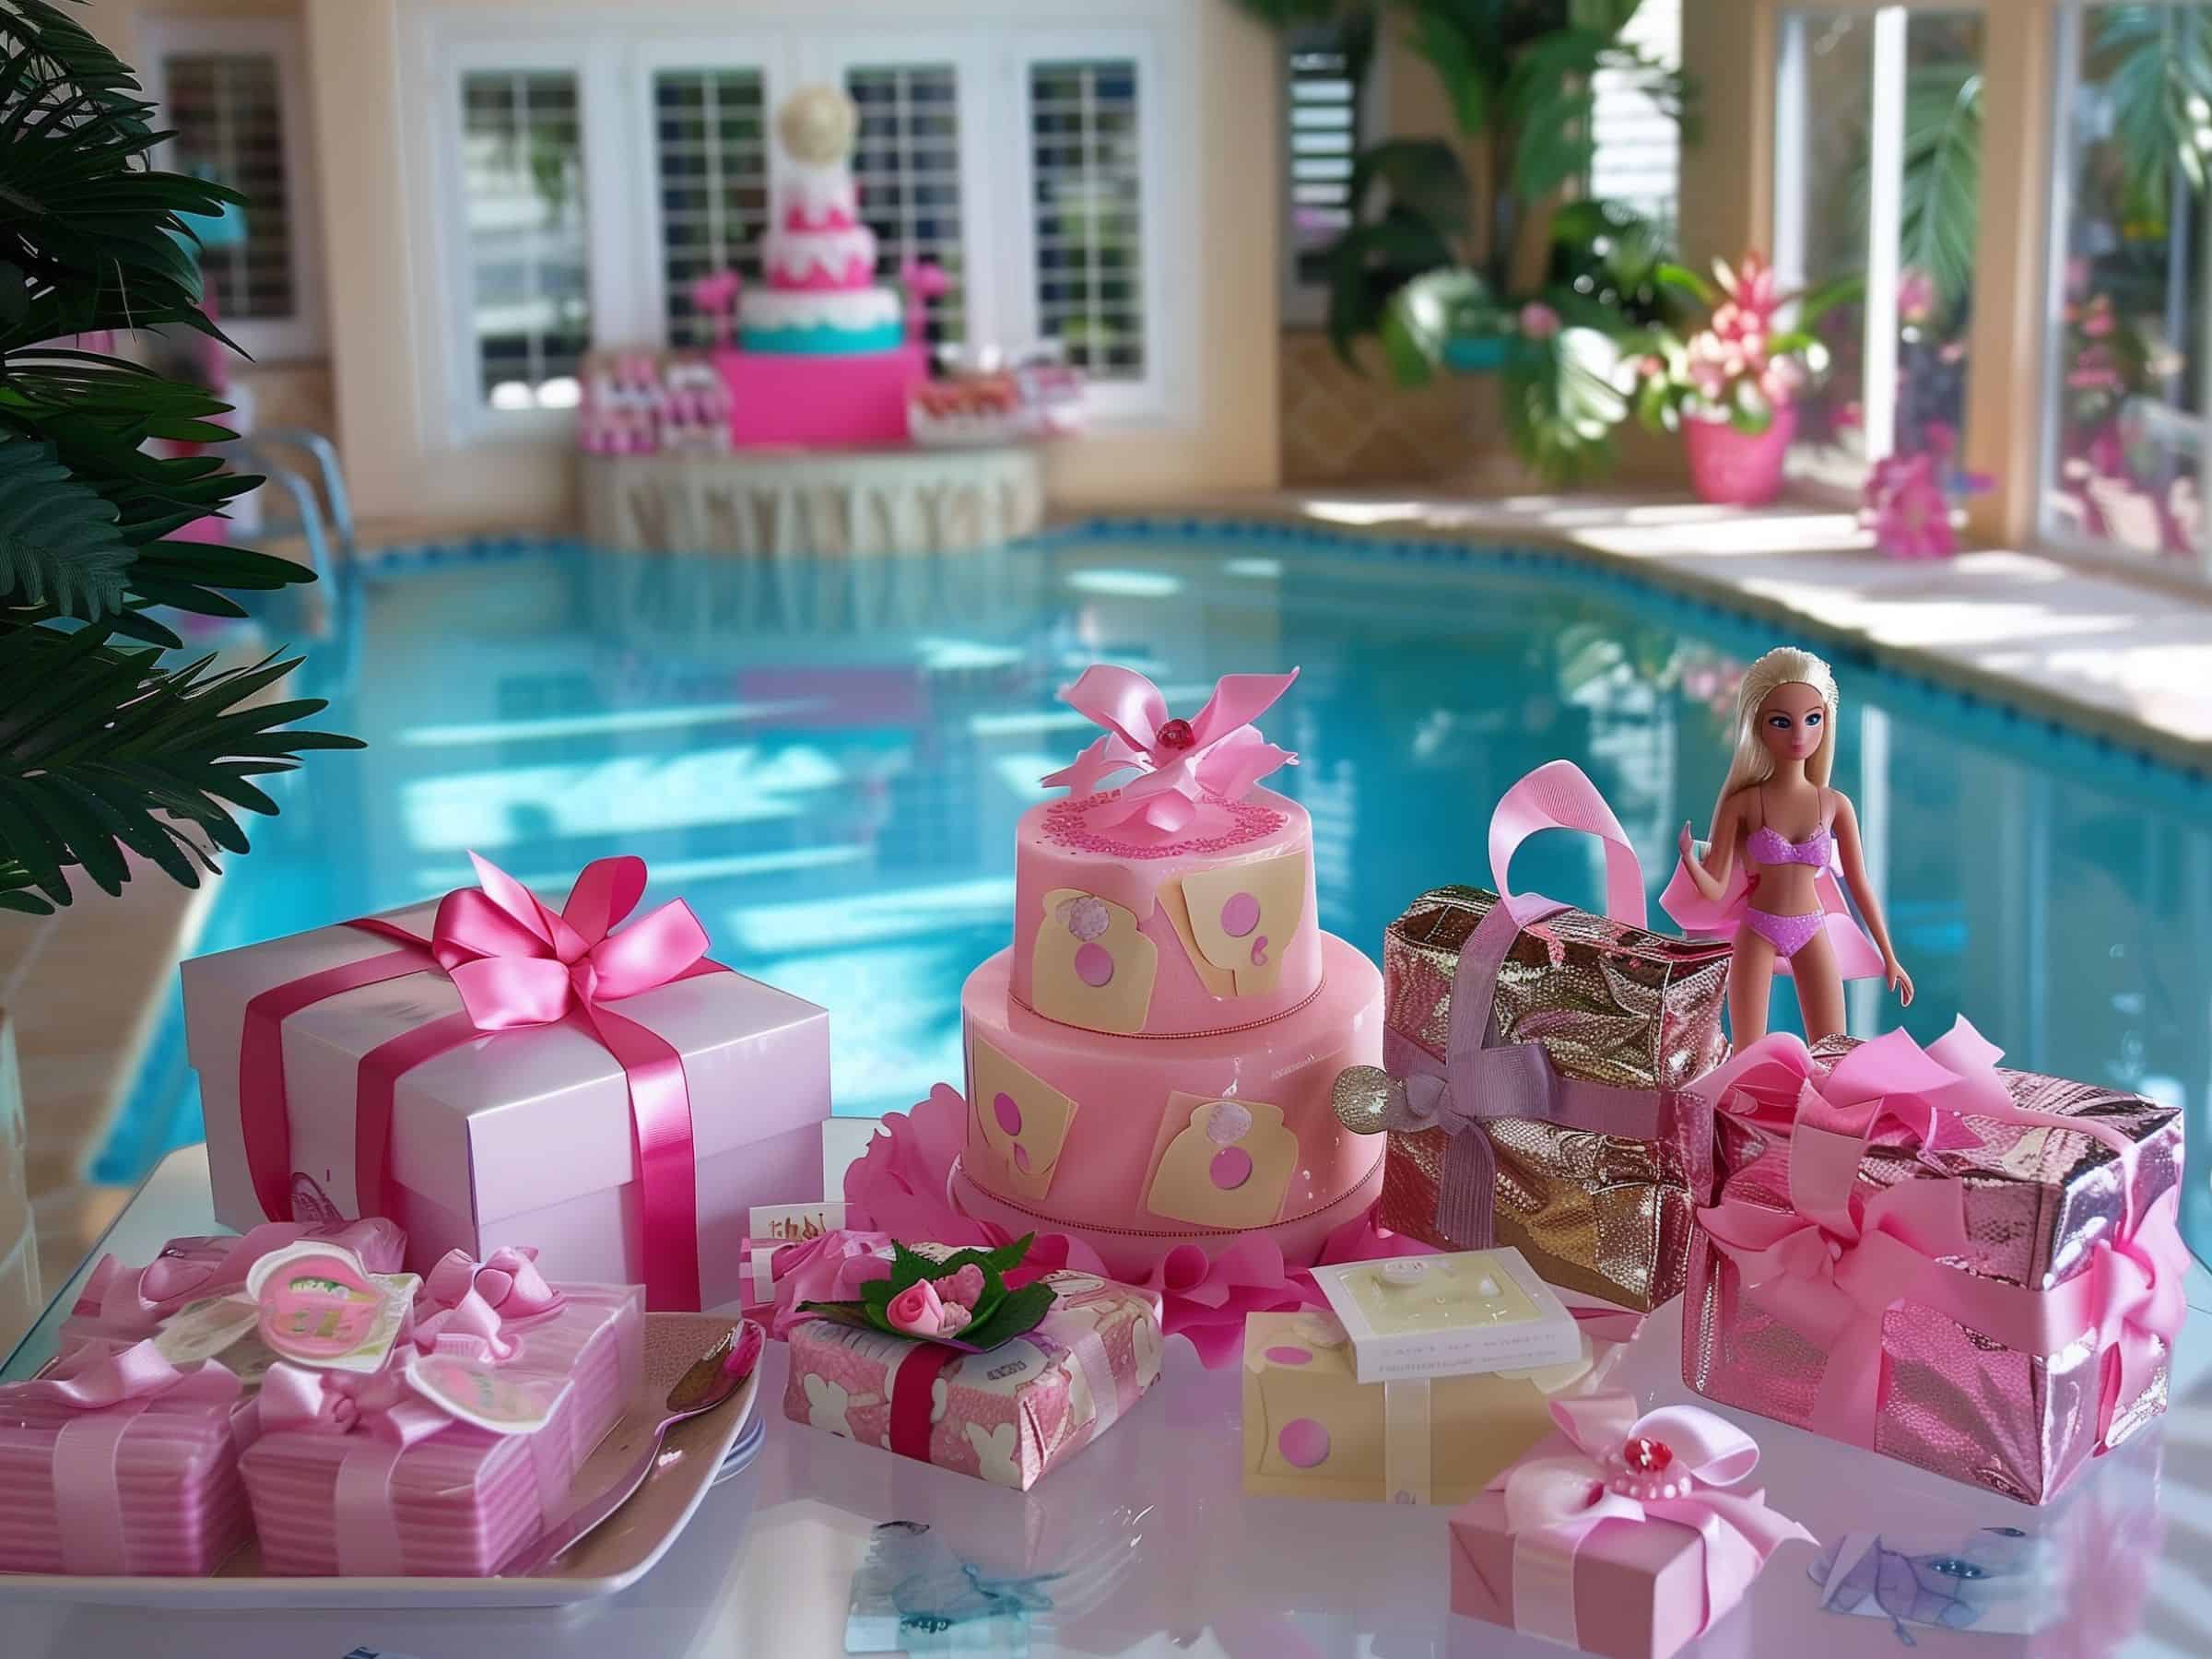 Barbie pool party decorations and gift table